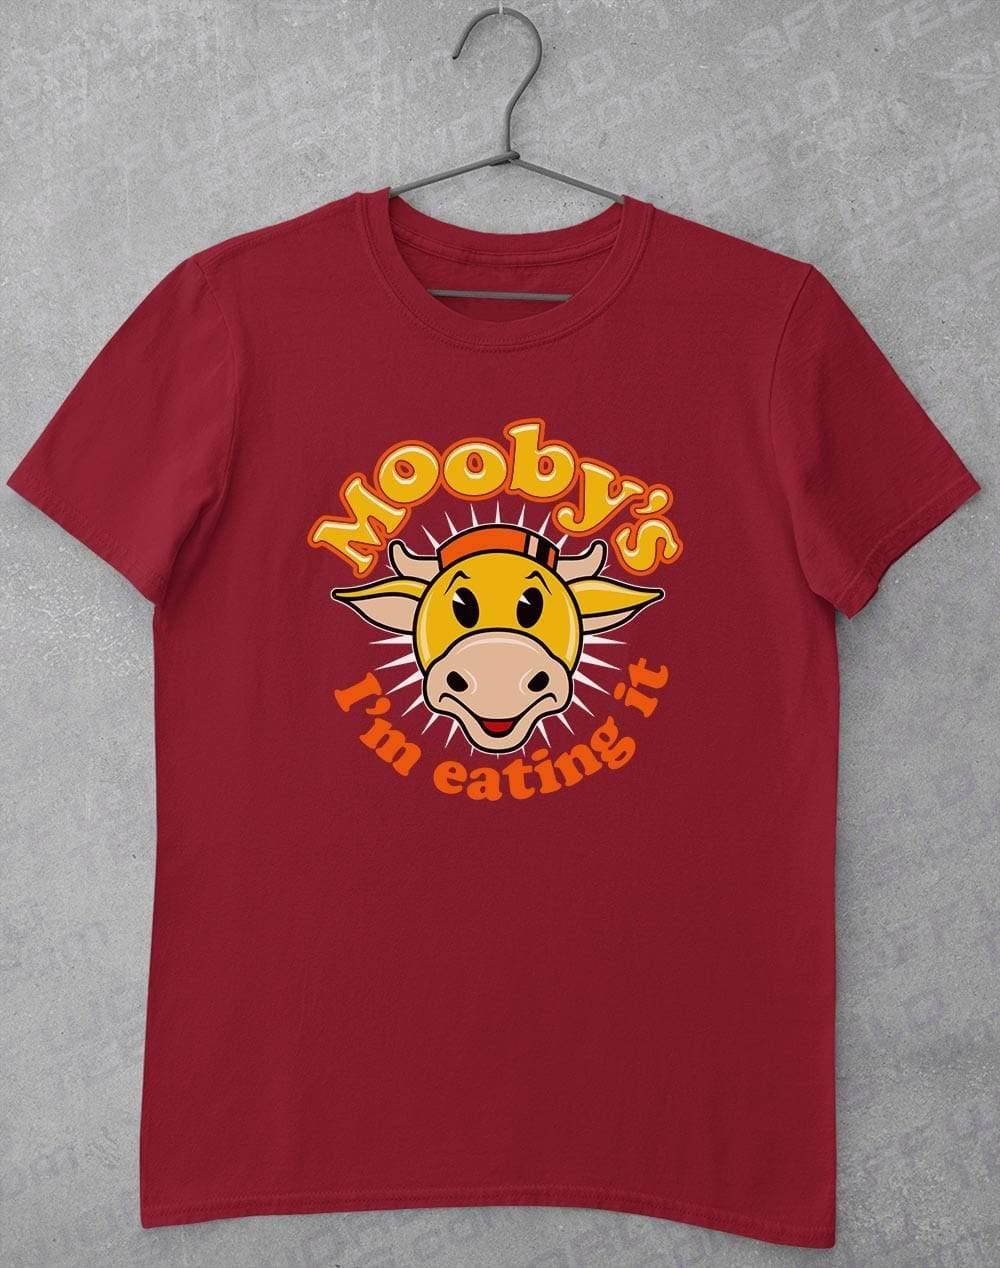 Mooby's T-Shirt S / Cardinal Red  - Off World Tees